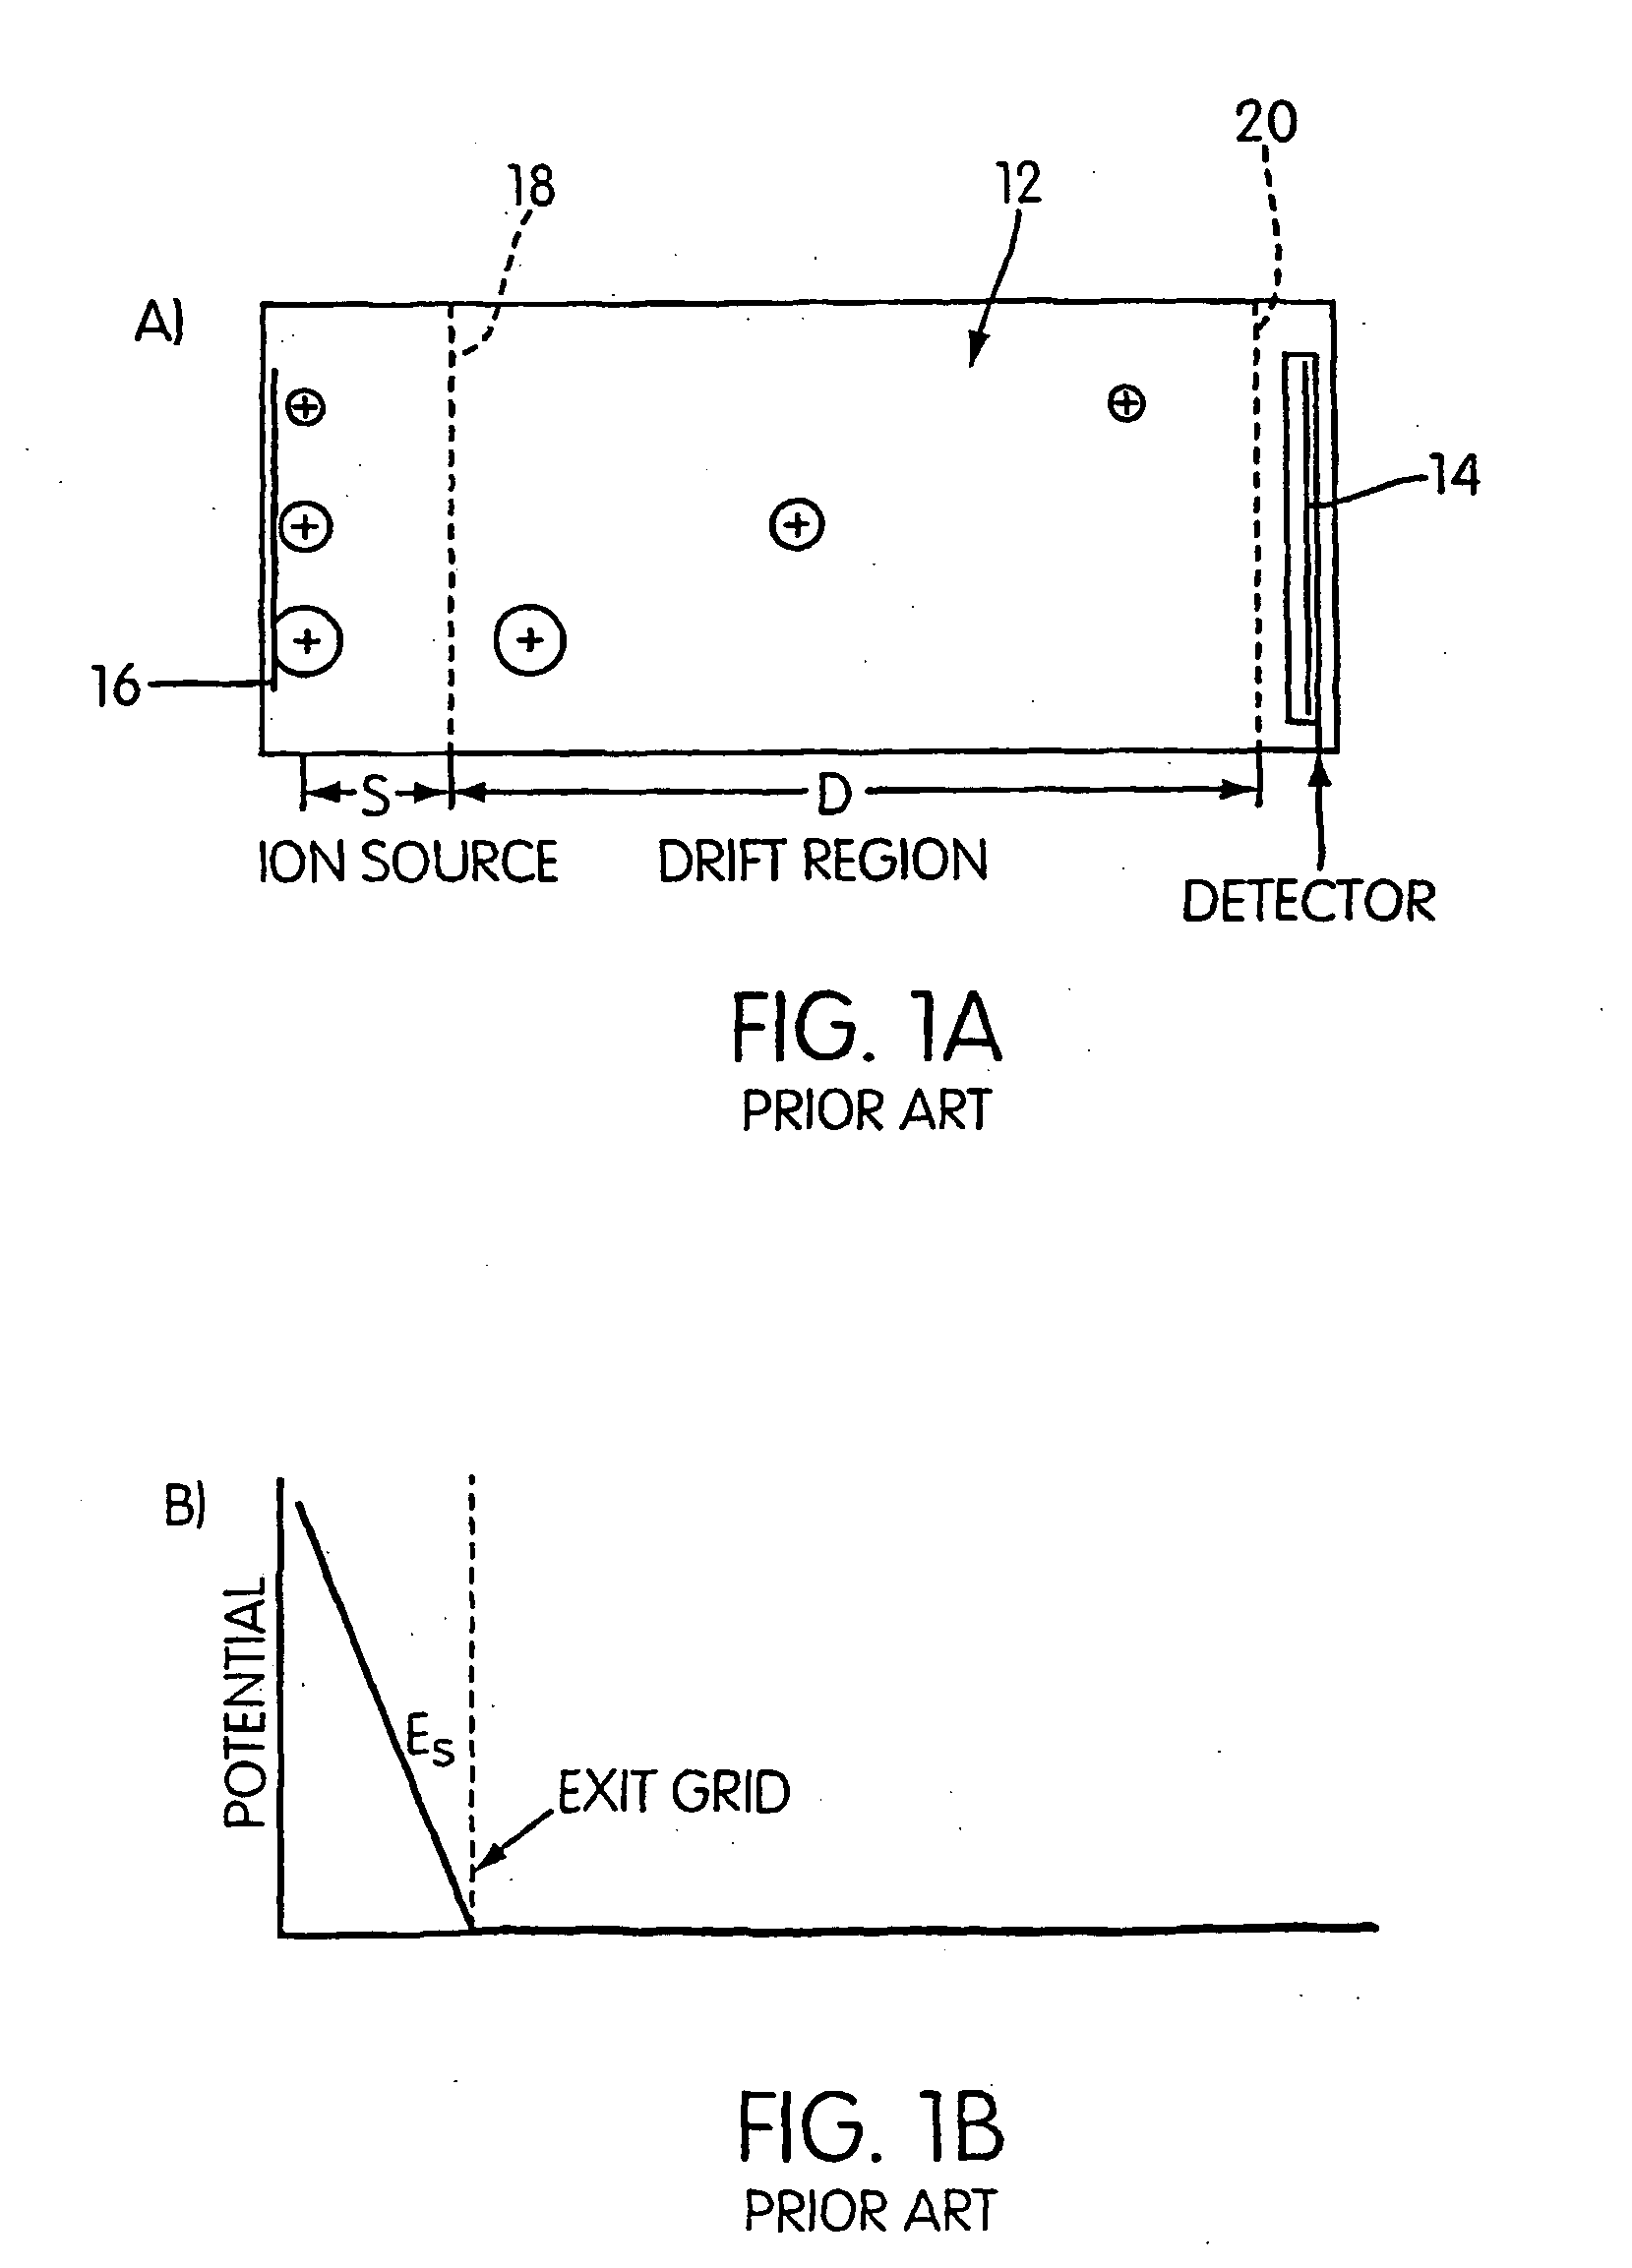 Time-of-flight mass spectrometer combining fields non-linear in time and space